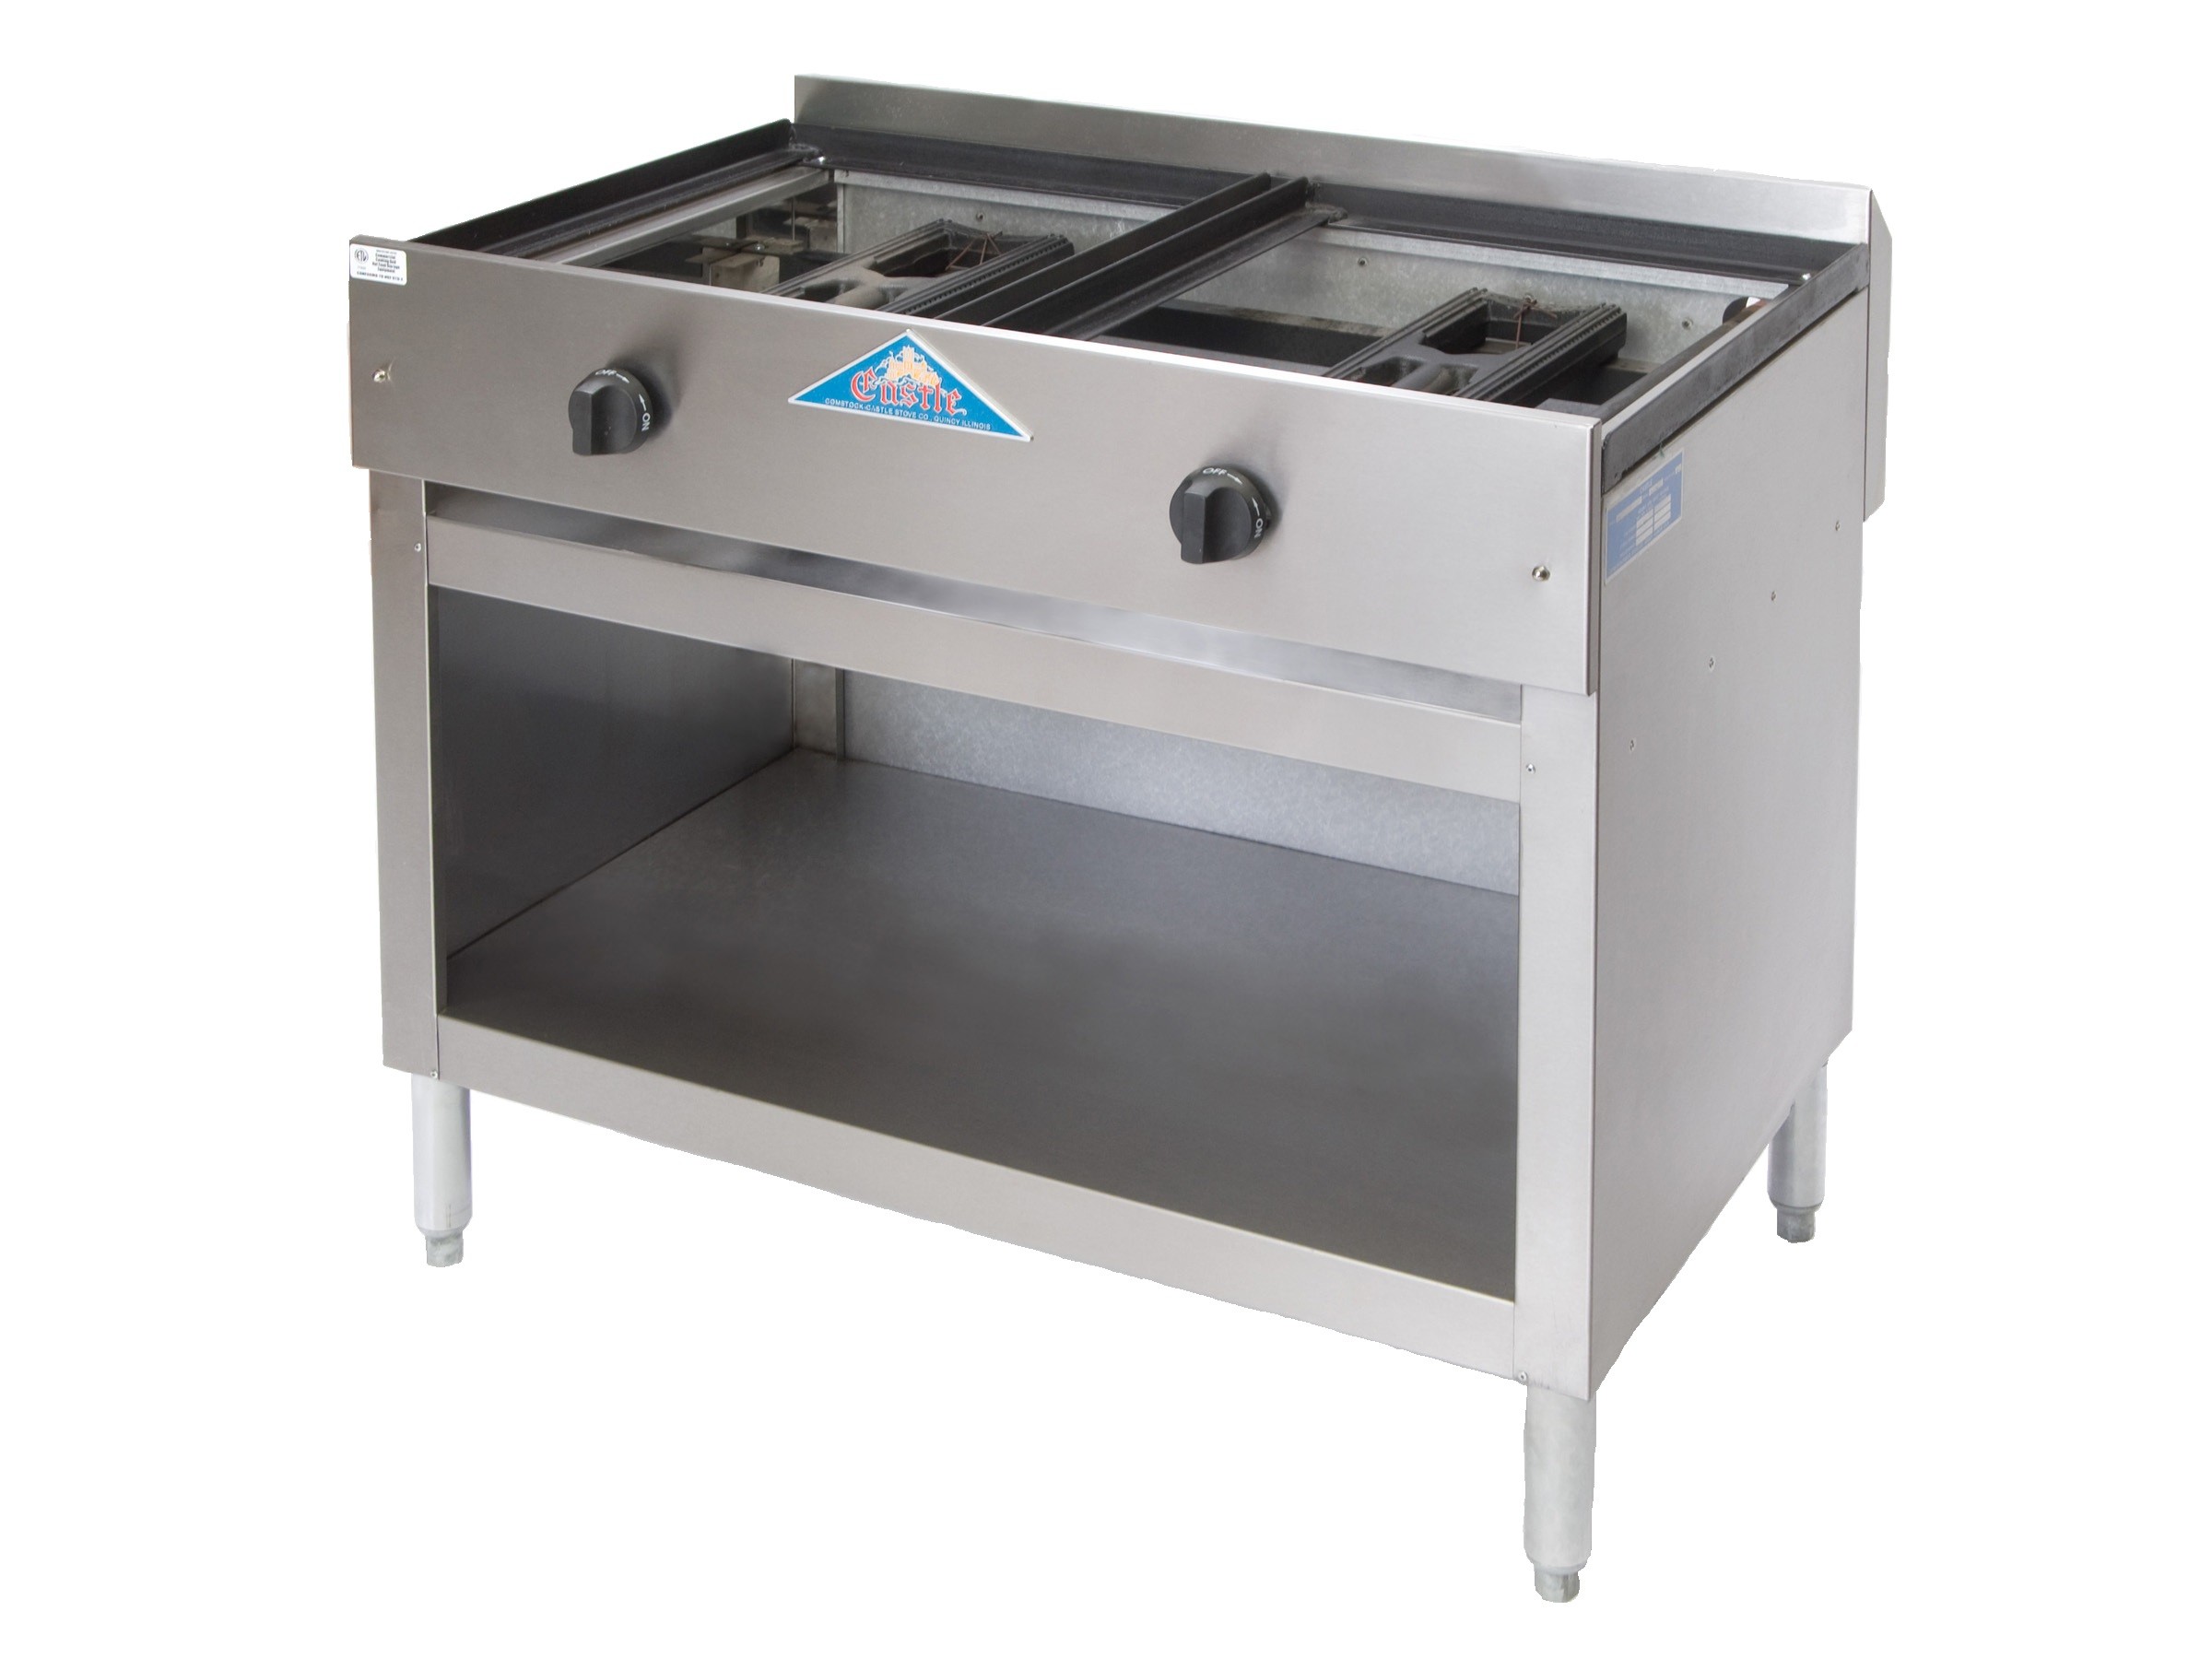 https://comstockcastlestove.com/images/product/1515682390T-2.jpg